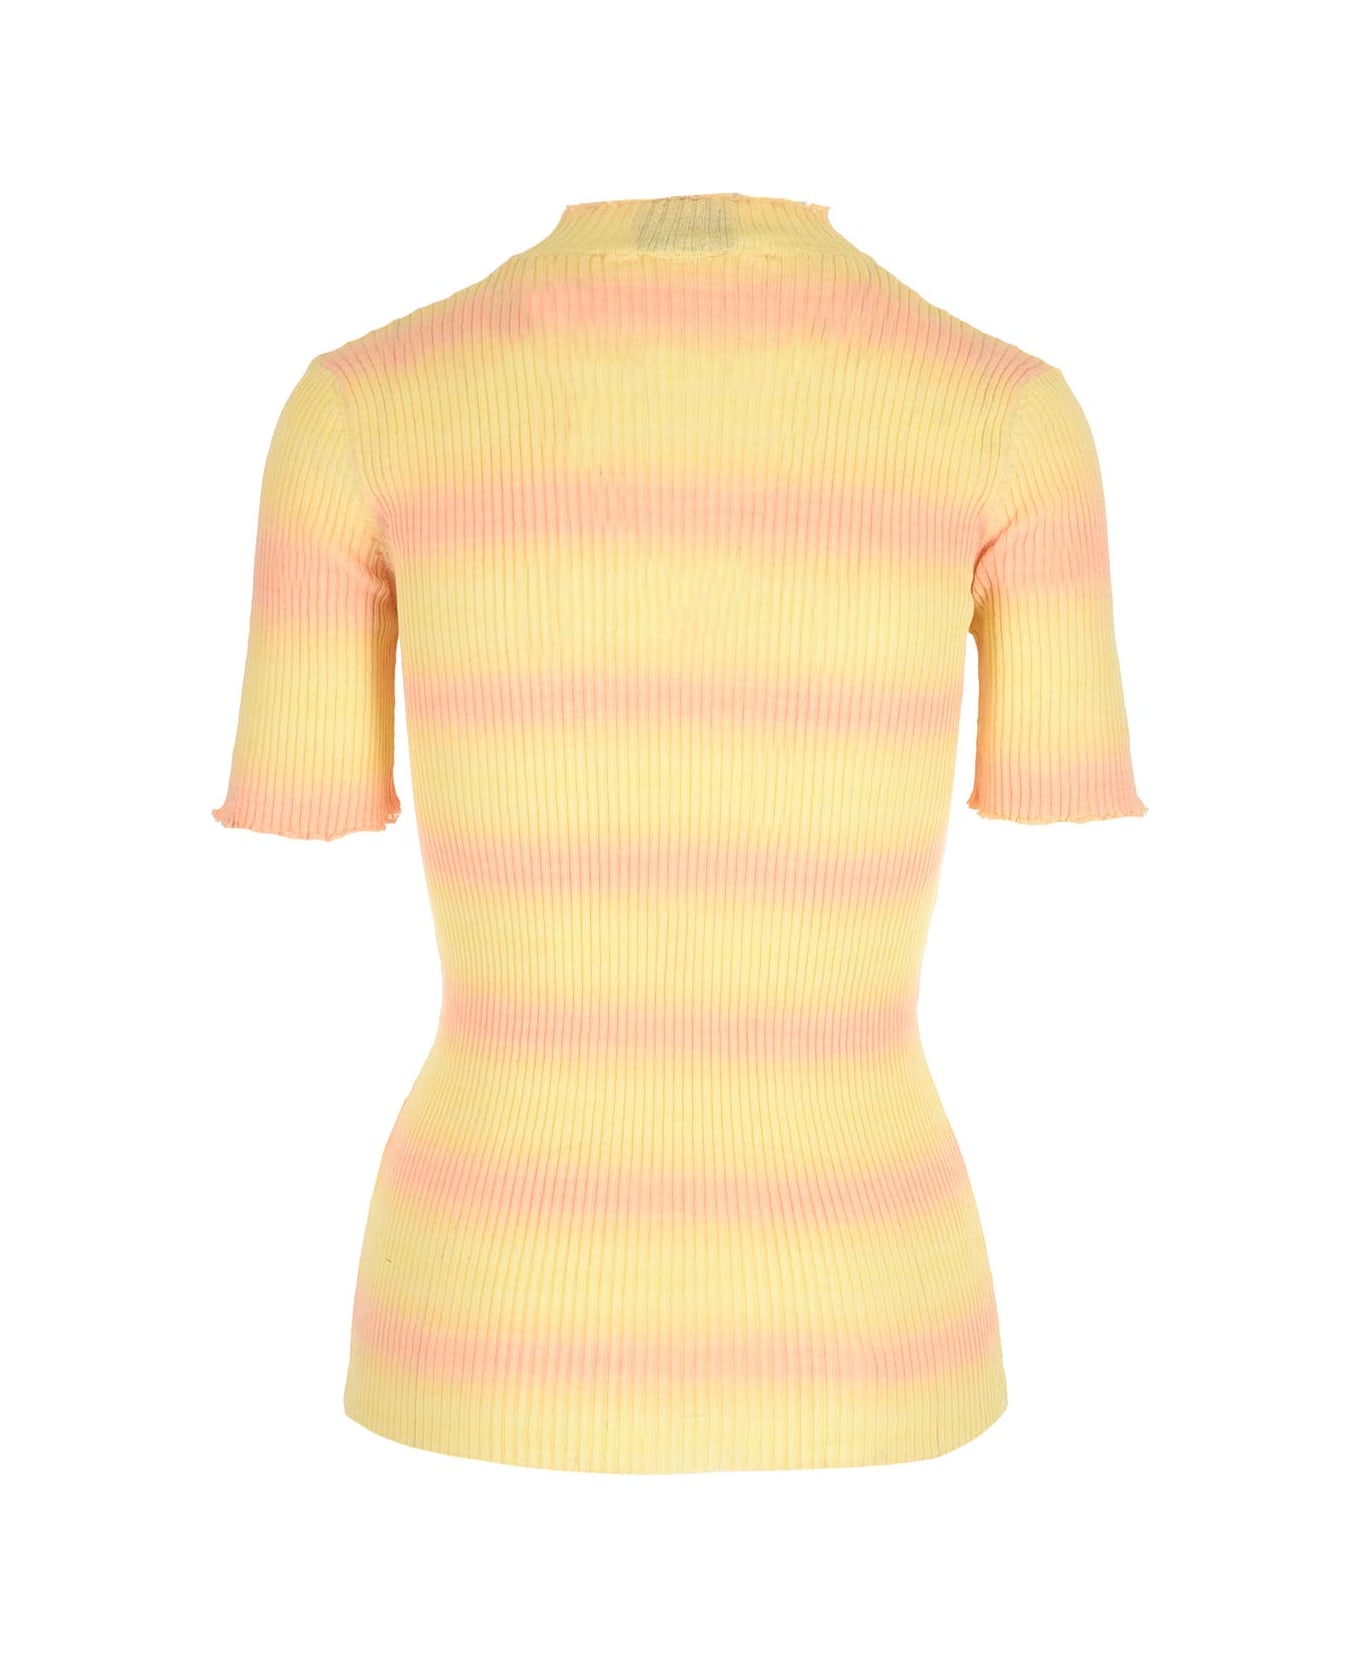 A.P.C. Striped Knitted Top - Light Yellow